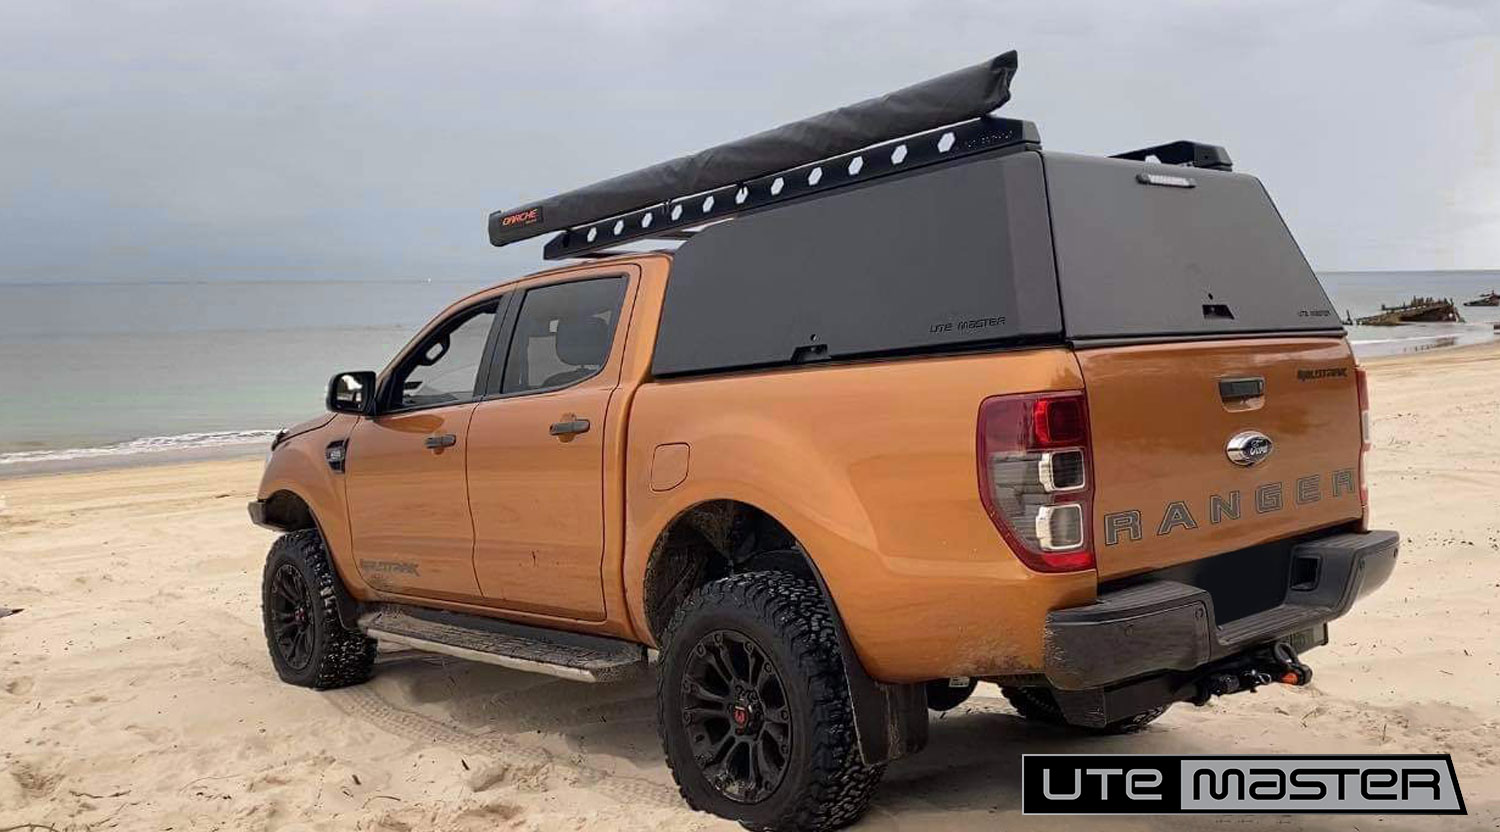 The Ultimate Overlanding Ute Canopy